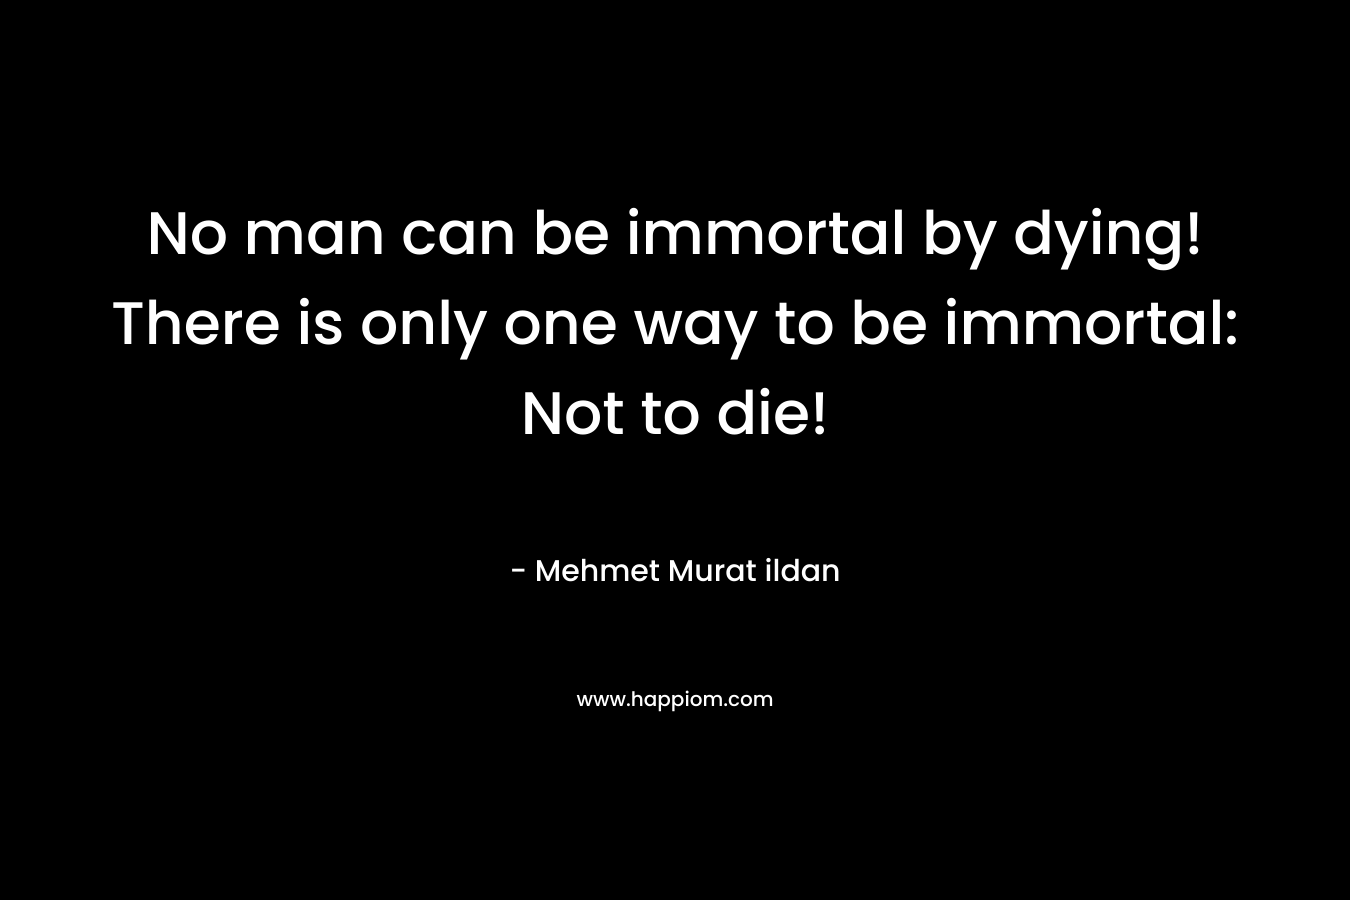 No man can be immortal by dying! There is only one way to be immortal: Not to die!